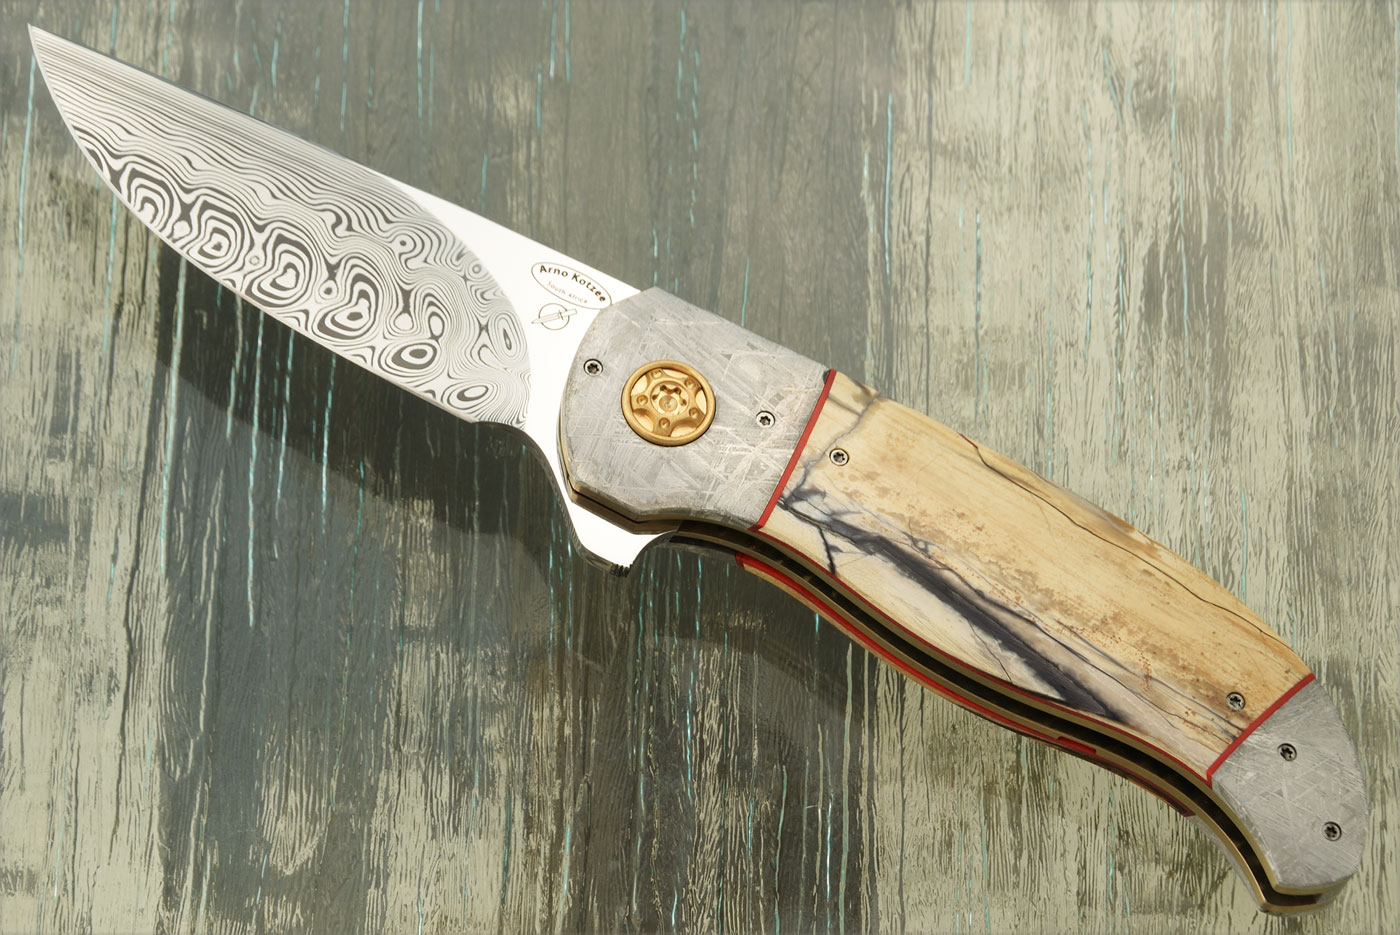 AKGM-02 Damascus Flipper with Mammoth Ivory and Meteorite (IKBS)